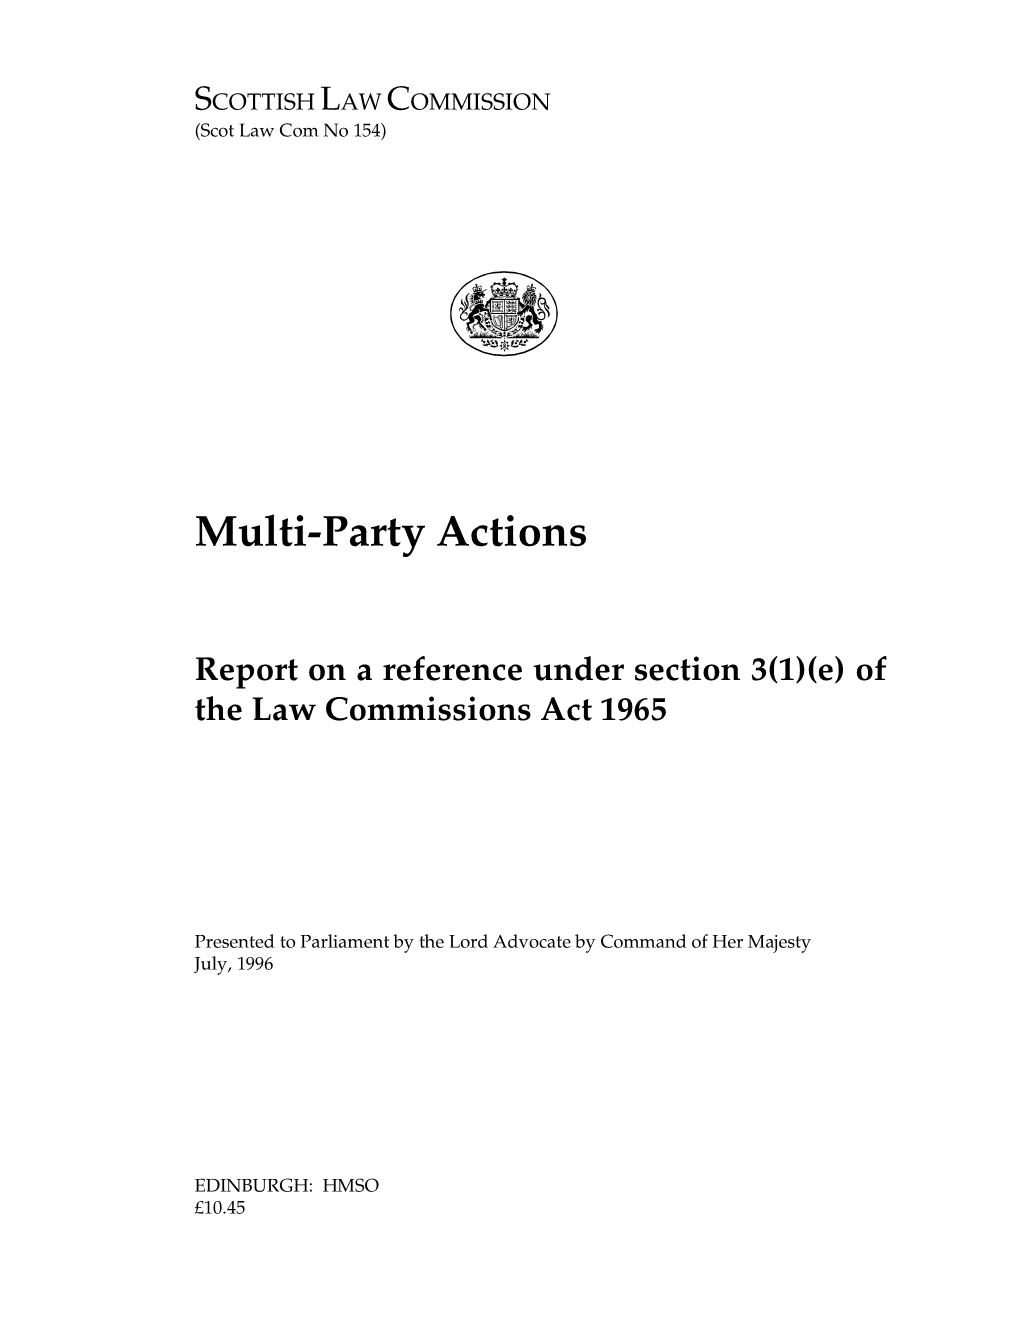 Multi-Party Actions Report